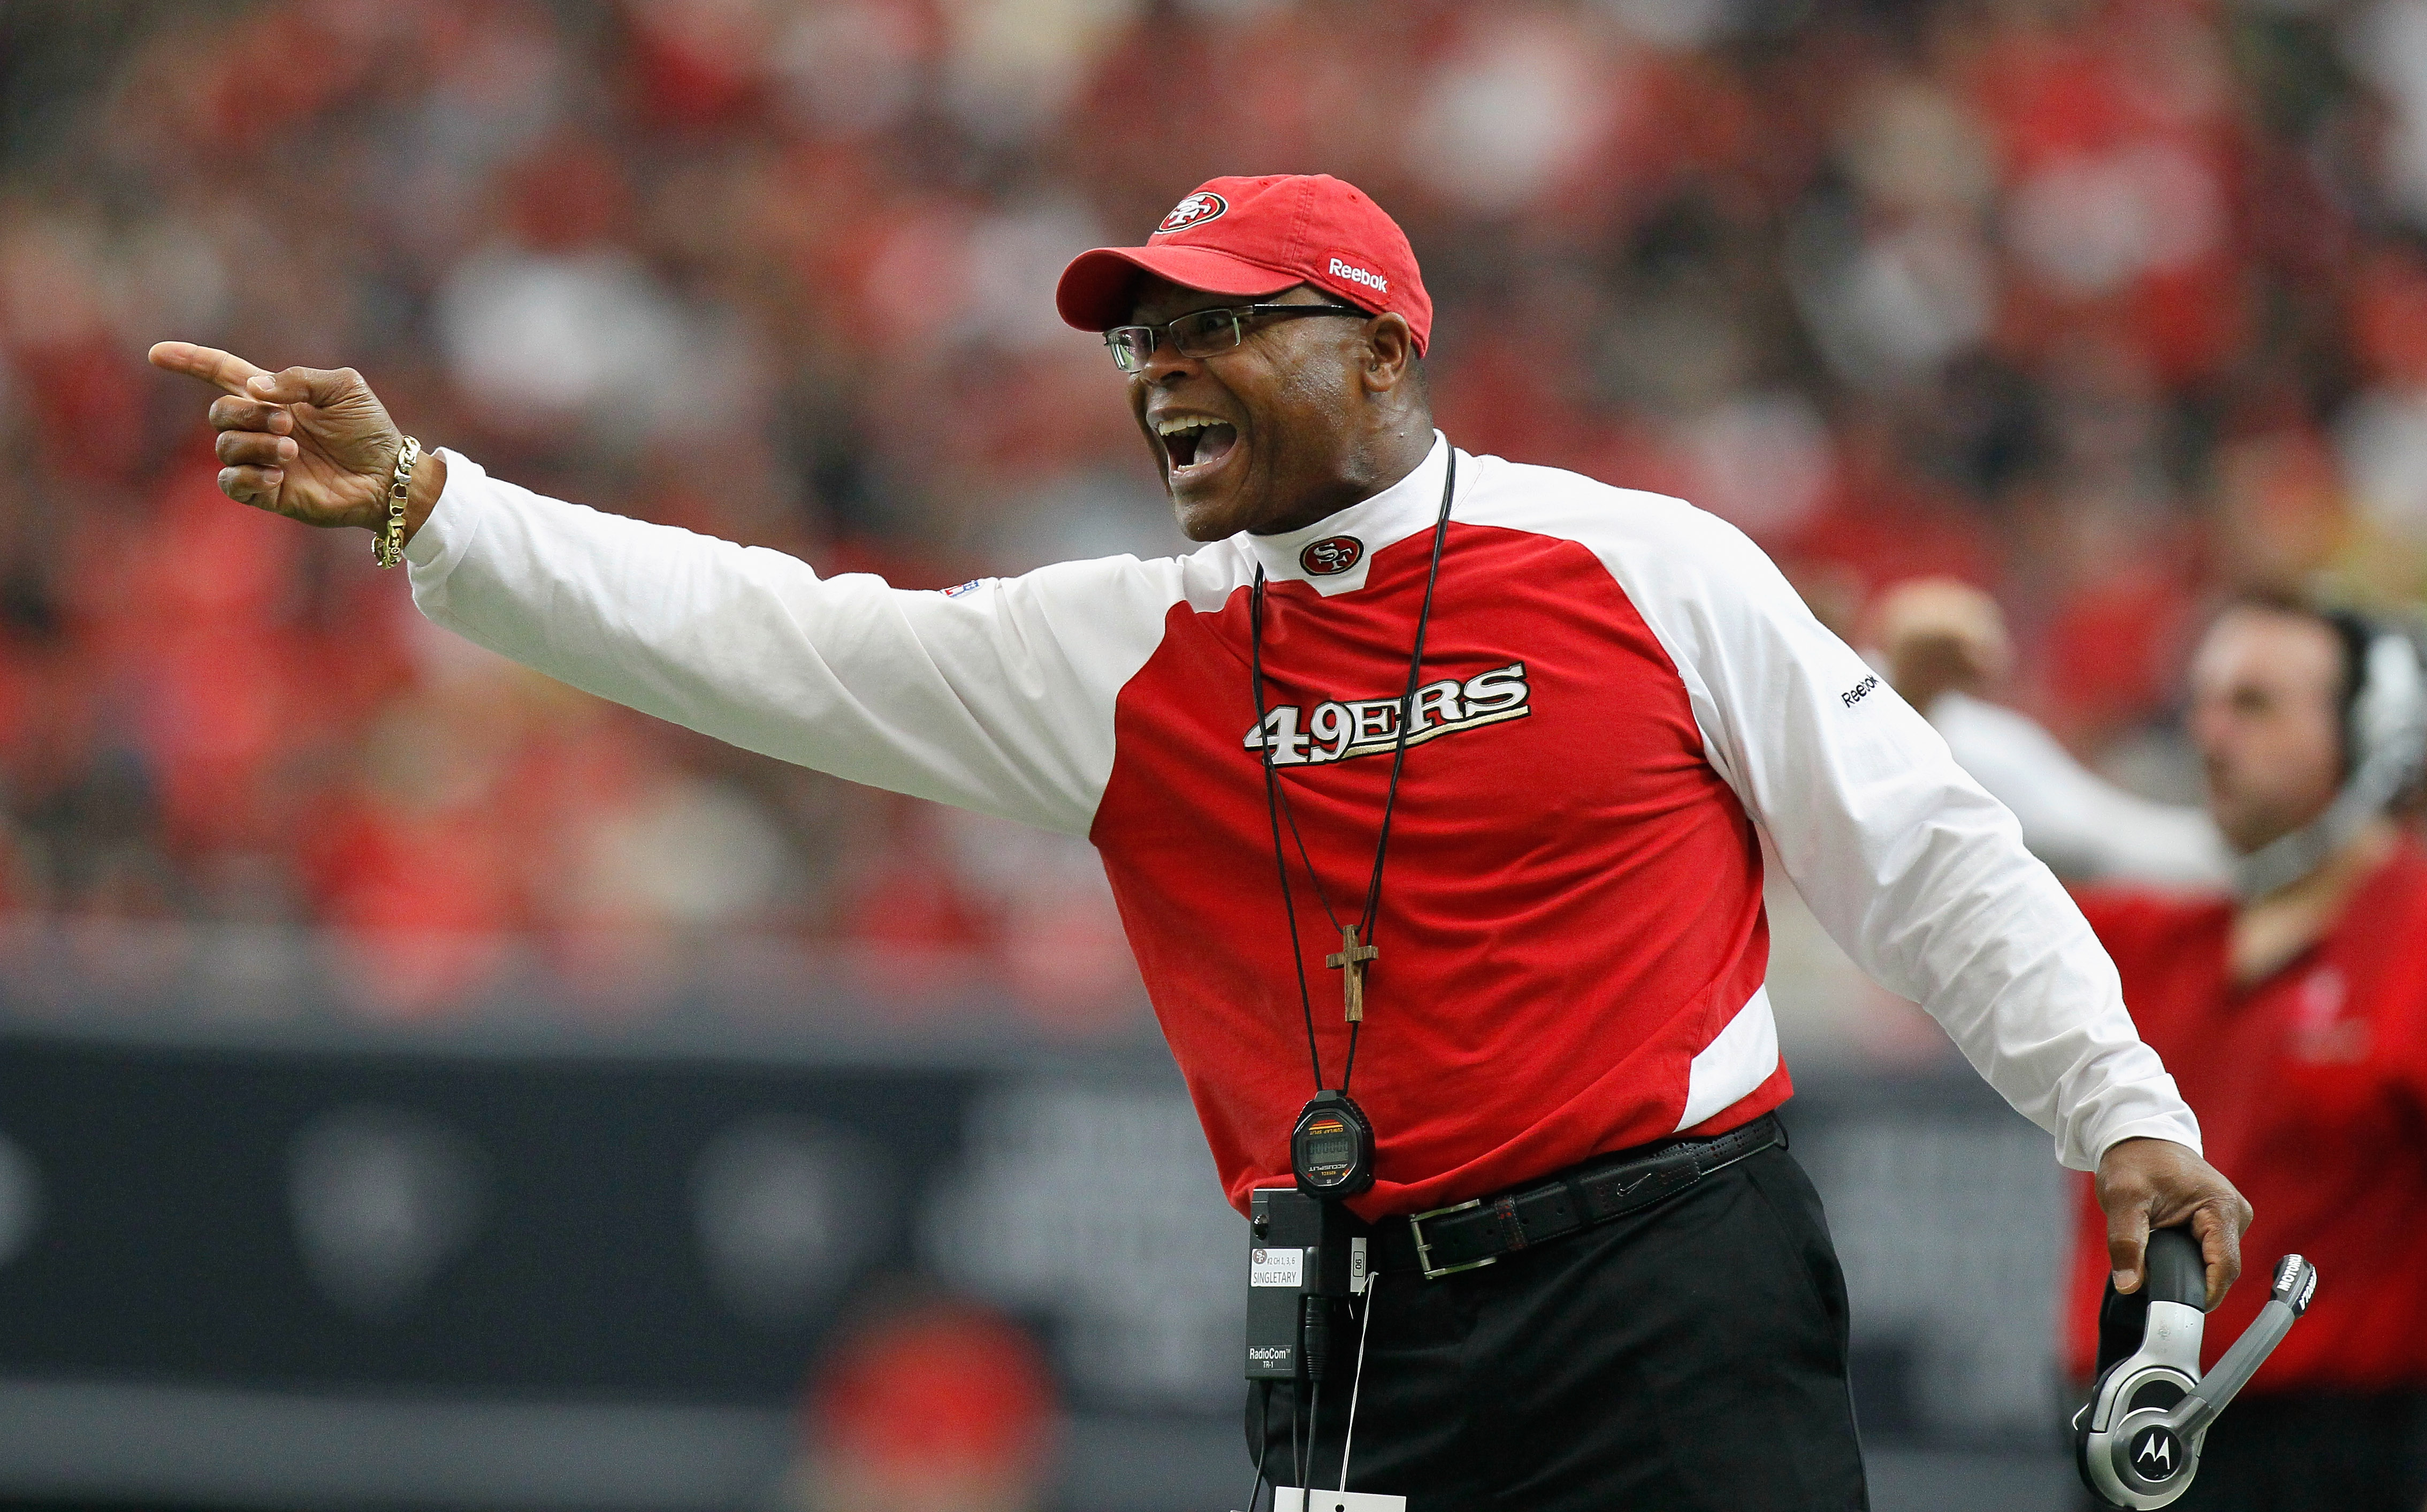 Mike Singletary: I'd 'absolutely' consider coaching at Baylor